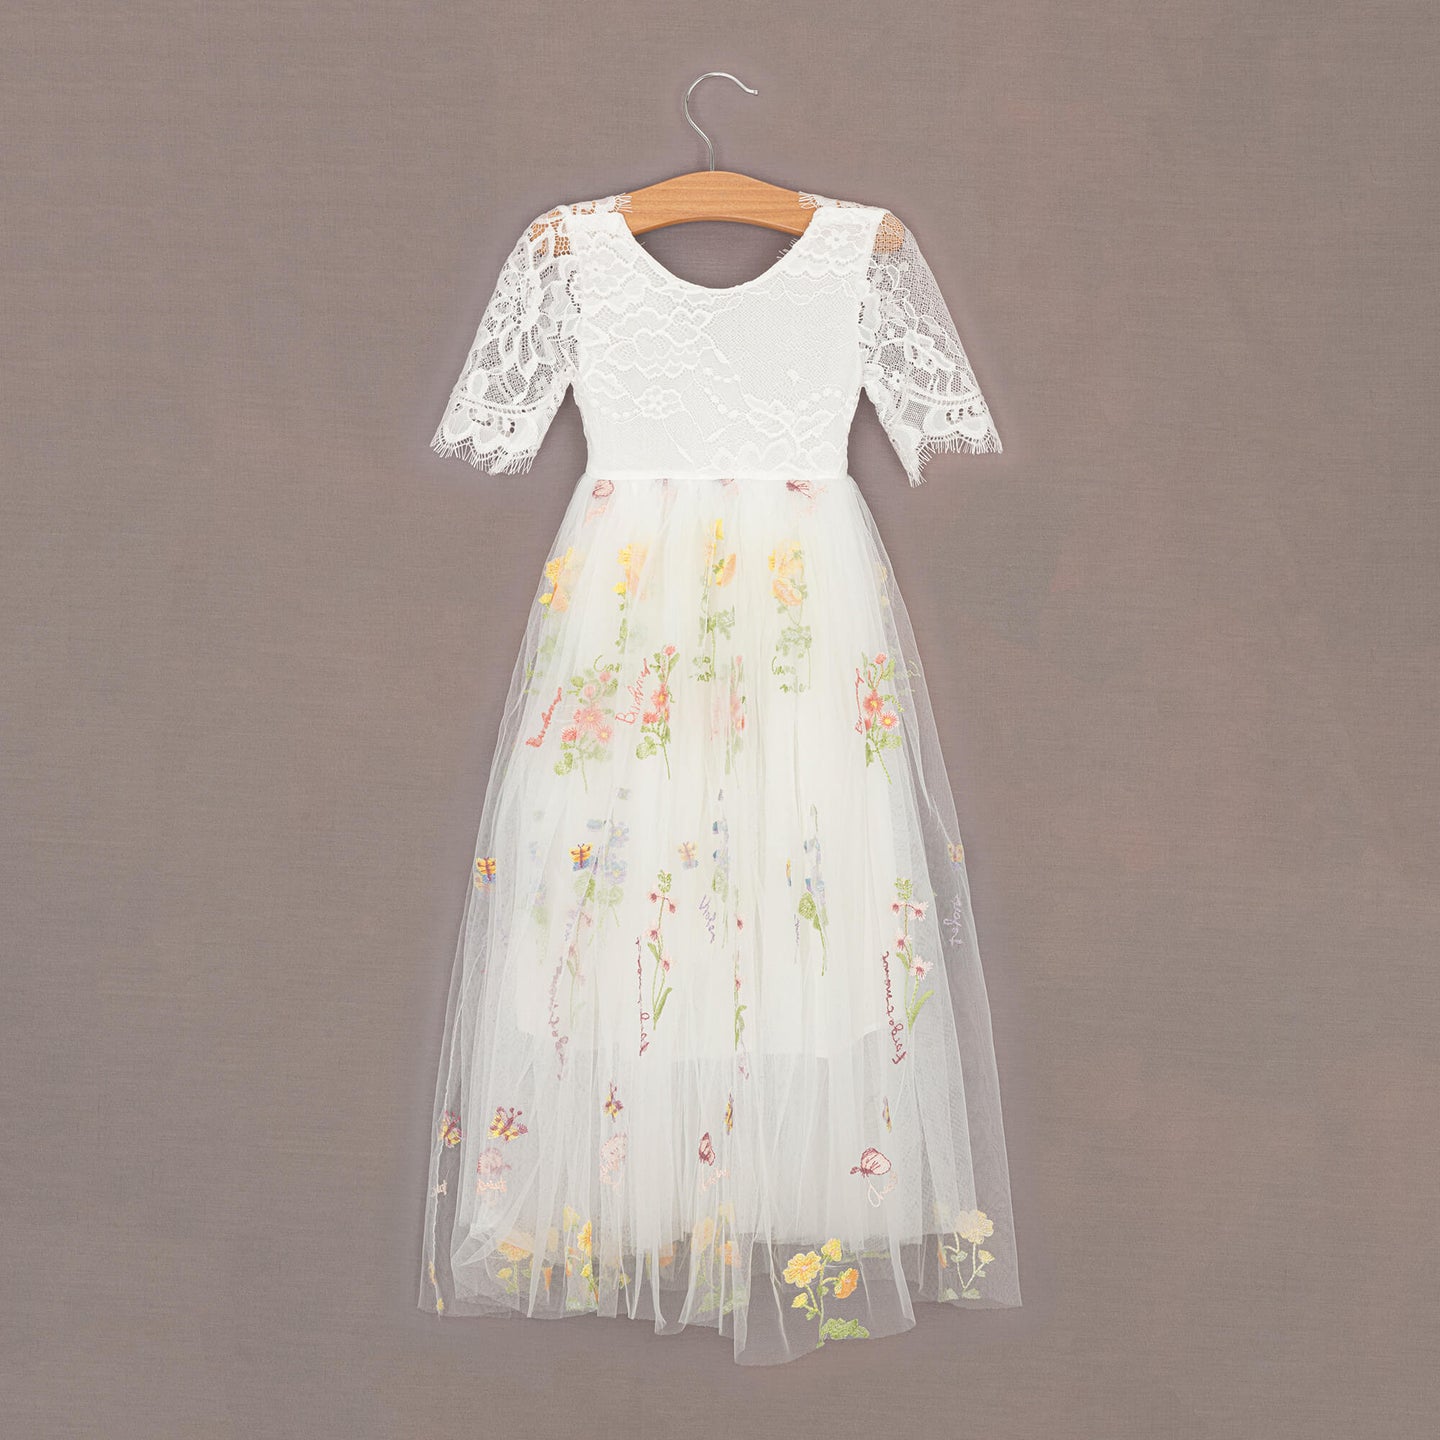 White dress with embroidery detail